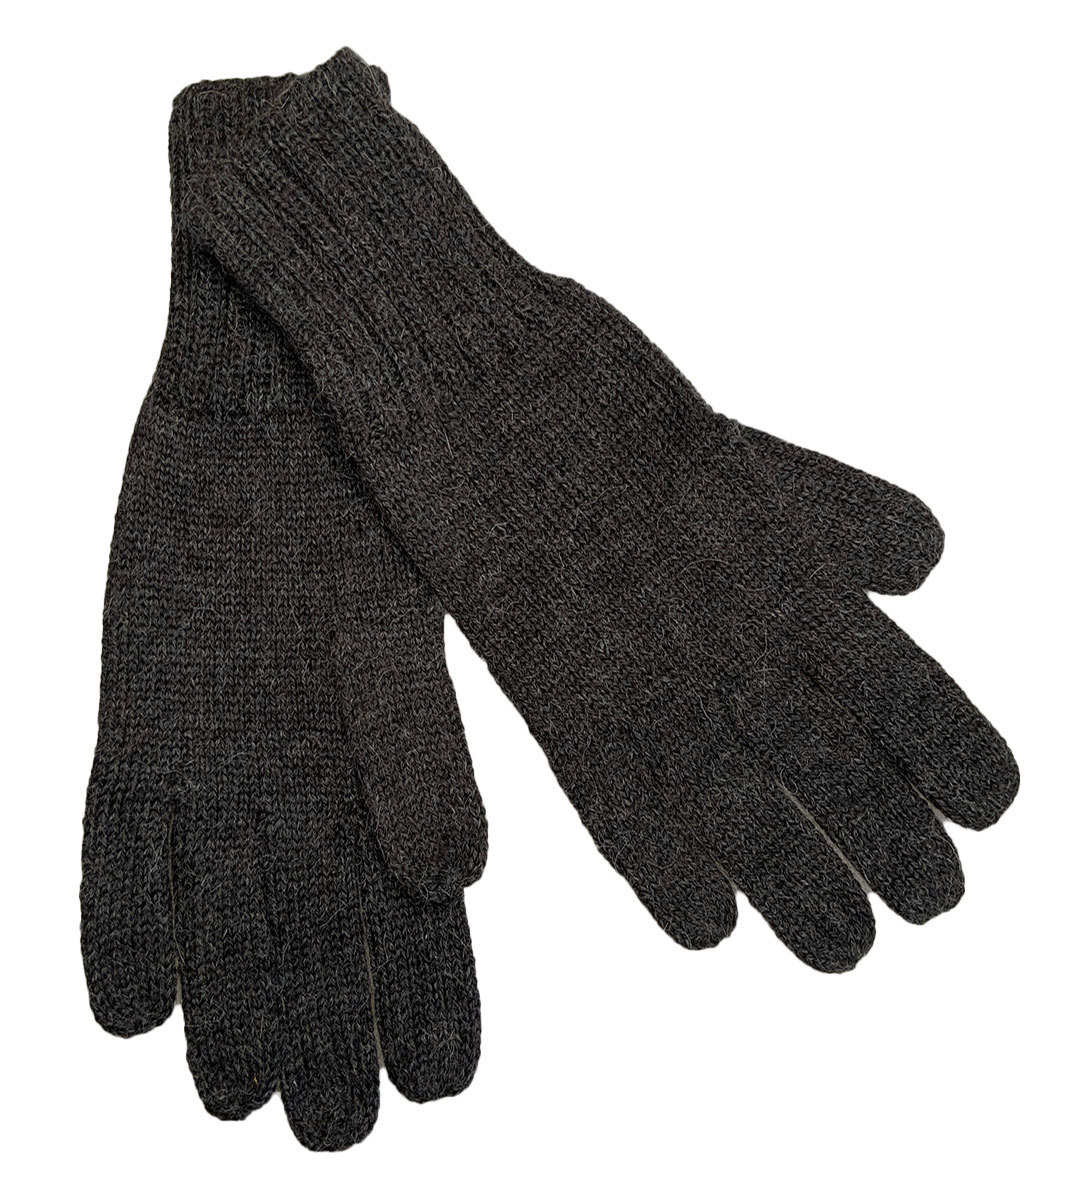 Shannon Gloves - Charcoal - 1